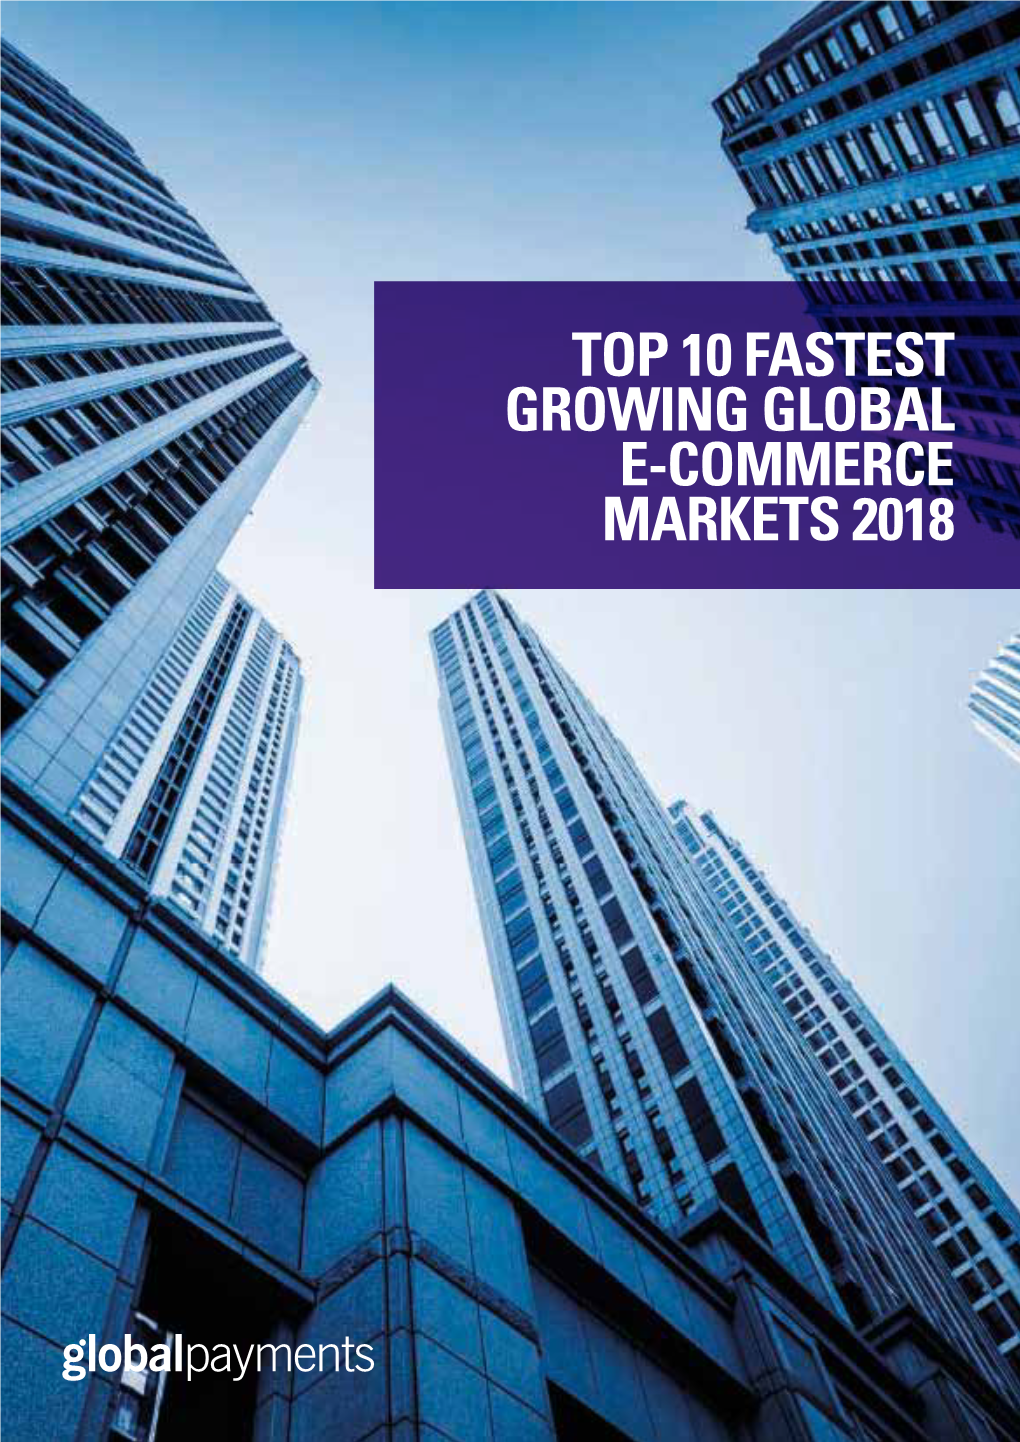 TOP 10 FASTEST GROWING GLOBAL E-COMMERCE MARKETS 2018 in Europe, E-Commerce Is Growing by but by Then, Shopping Habits and Consumer Loyalties 16% a Year1